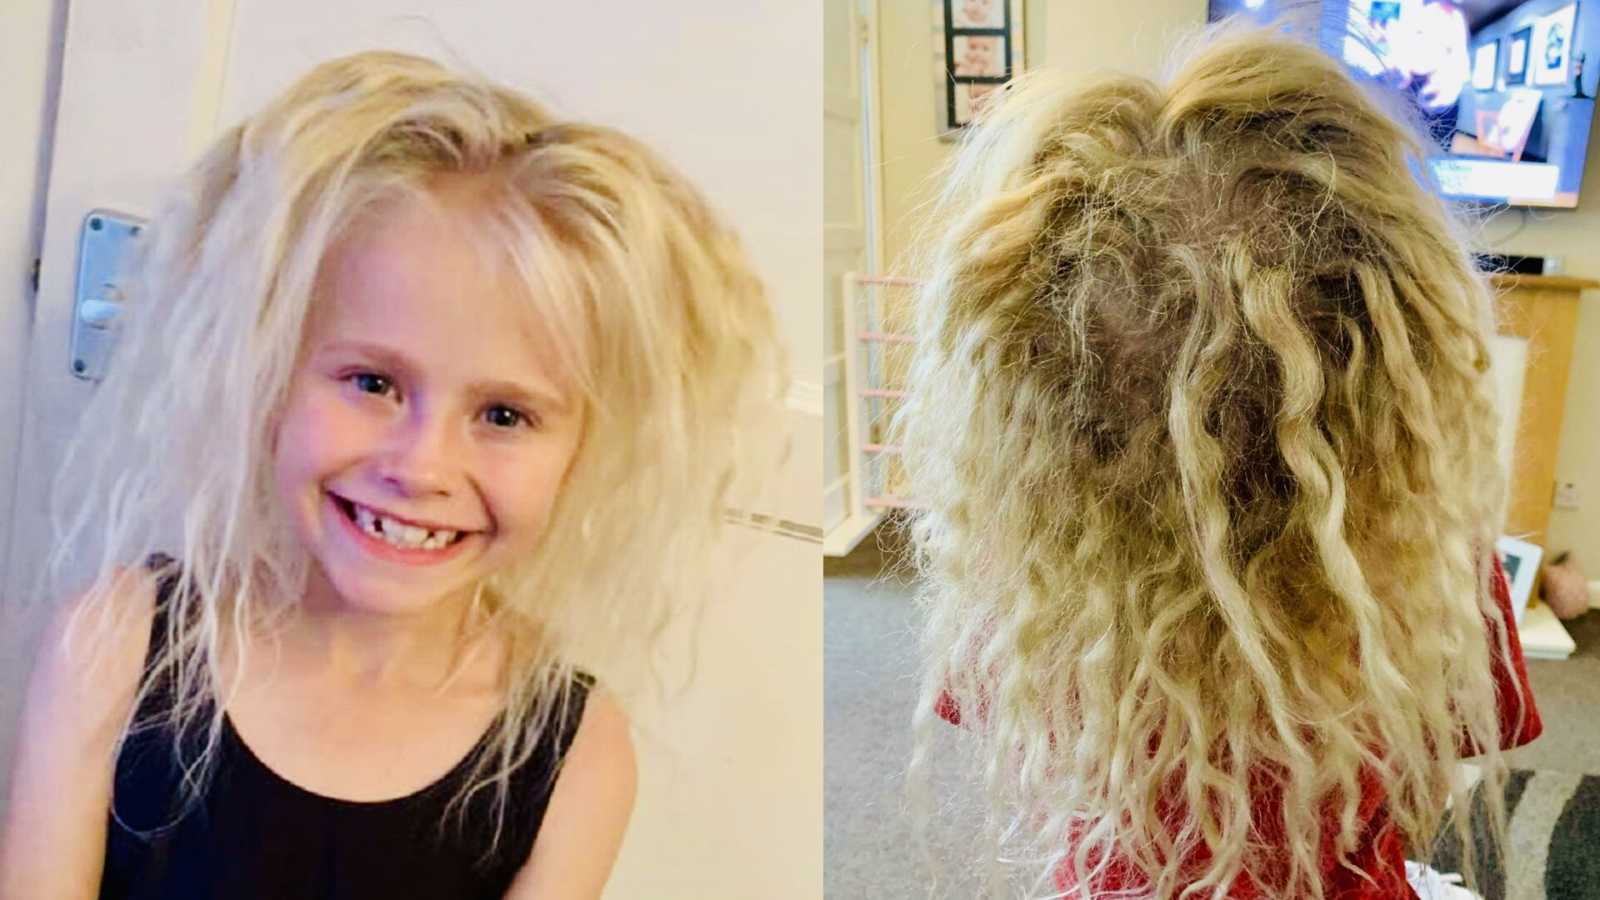 We nicknamed her Chucky, from the horror films!' Her hair got crazier,  bigger. Wiry, matted, like it was crimped.': Mom shocked by daughter's  'wool-like matted mess' blonde hair, learns of rare 'Uncombable